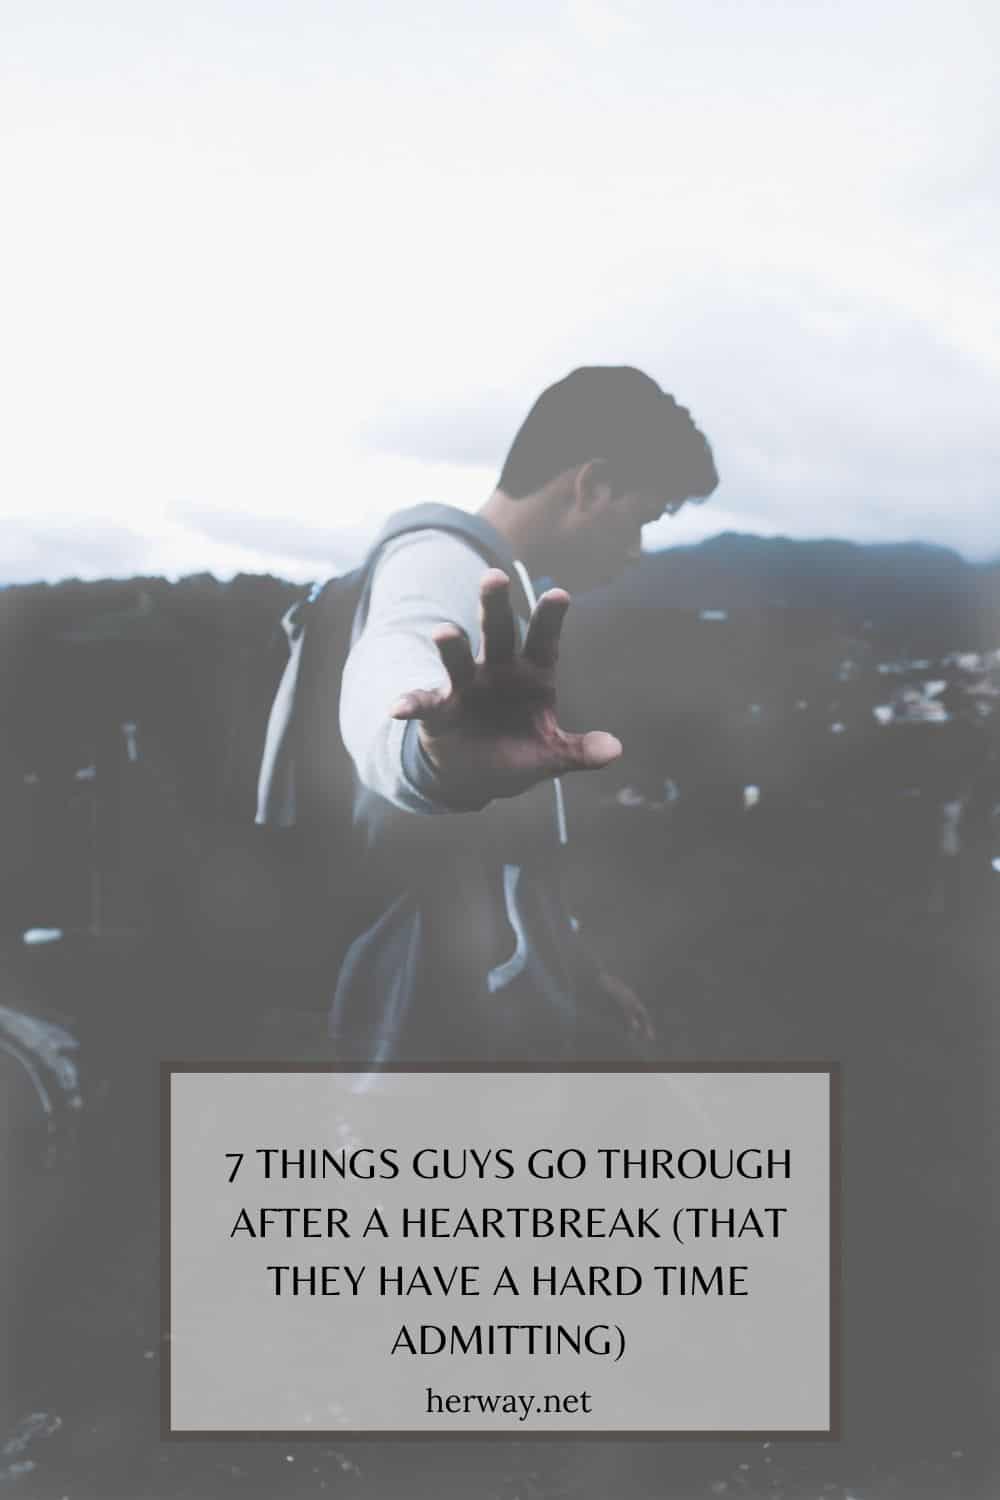 7 THINGS GUYS GO THROUGH AFTER A HEARTBREAK (THAT THEY HAVE A HARD TIME ADMITTING)